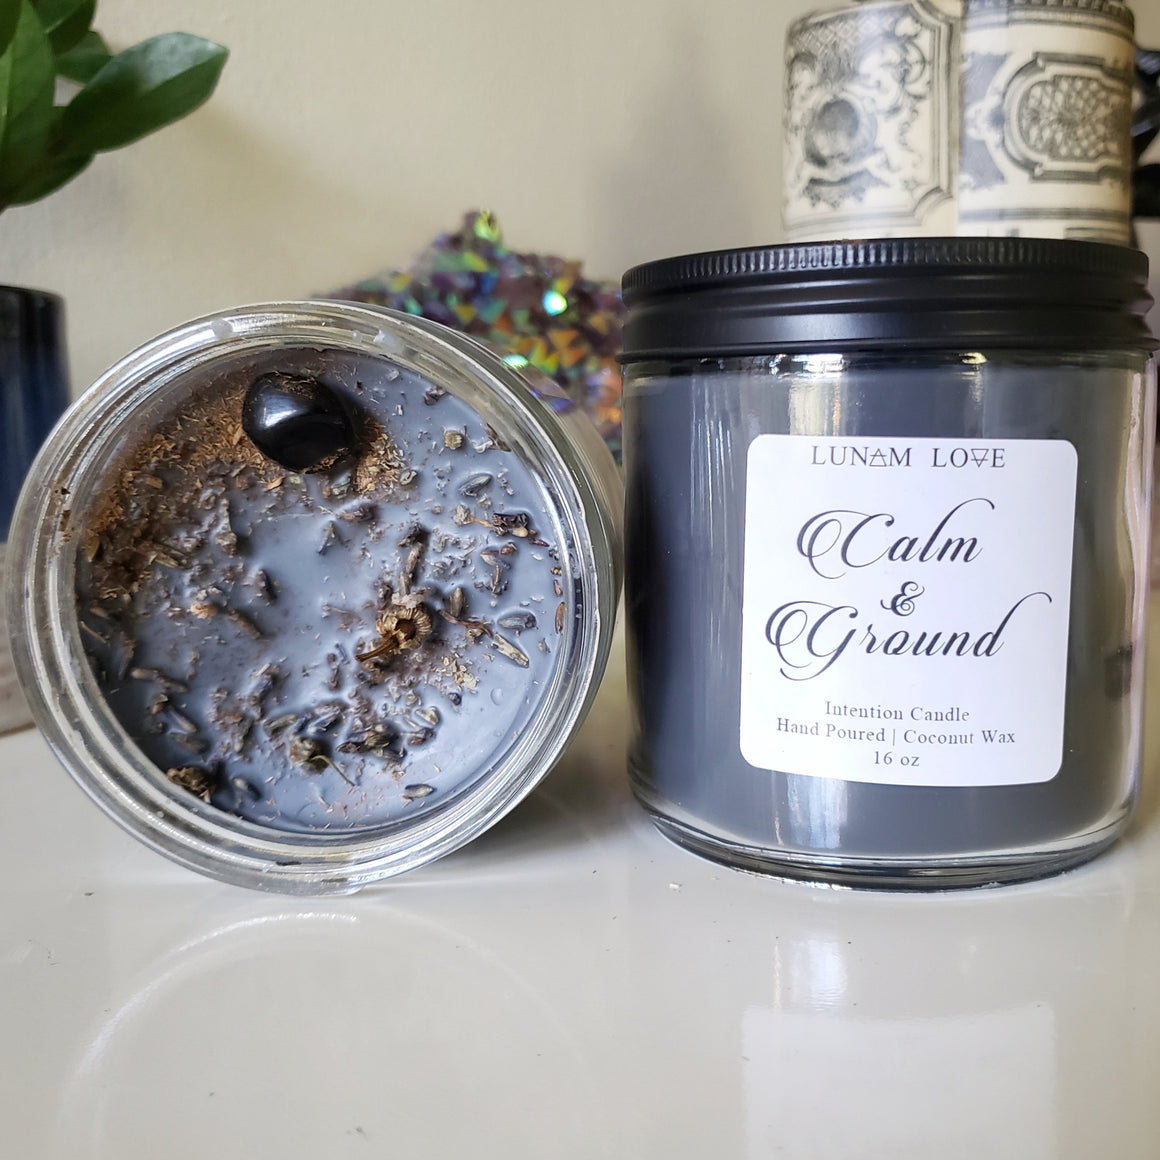 Calm and Ground Candle